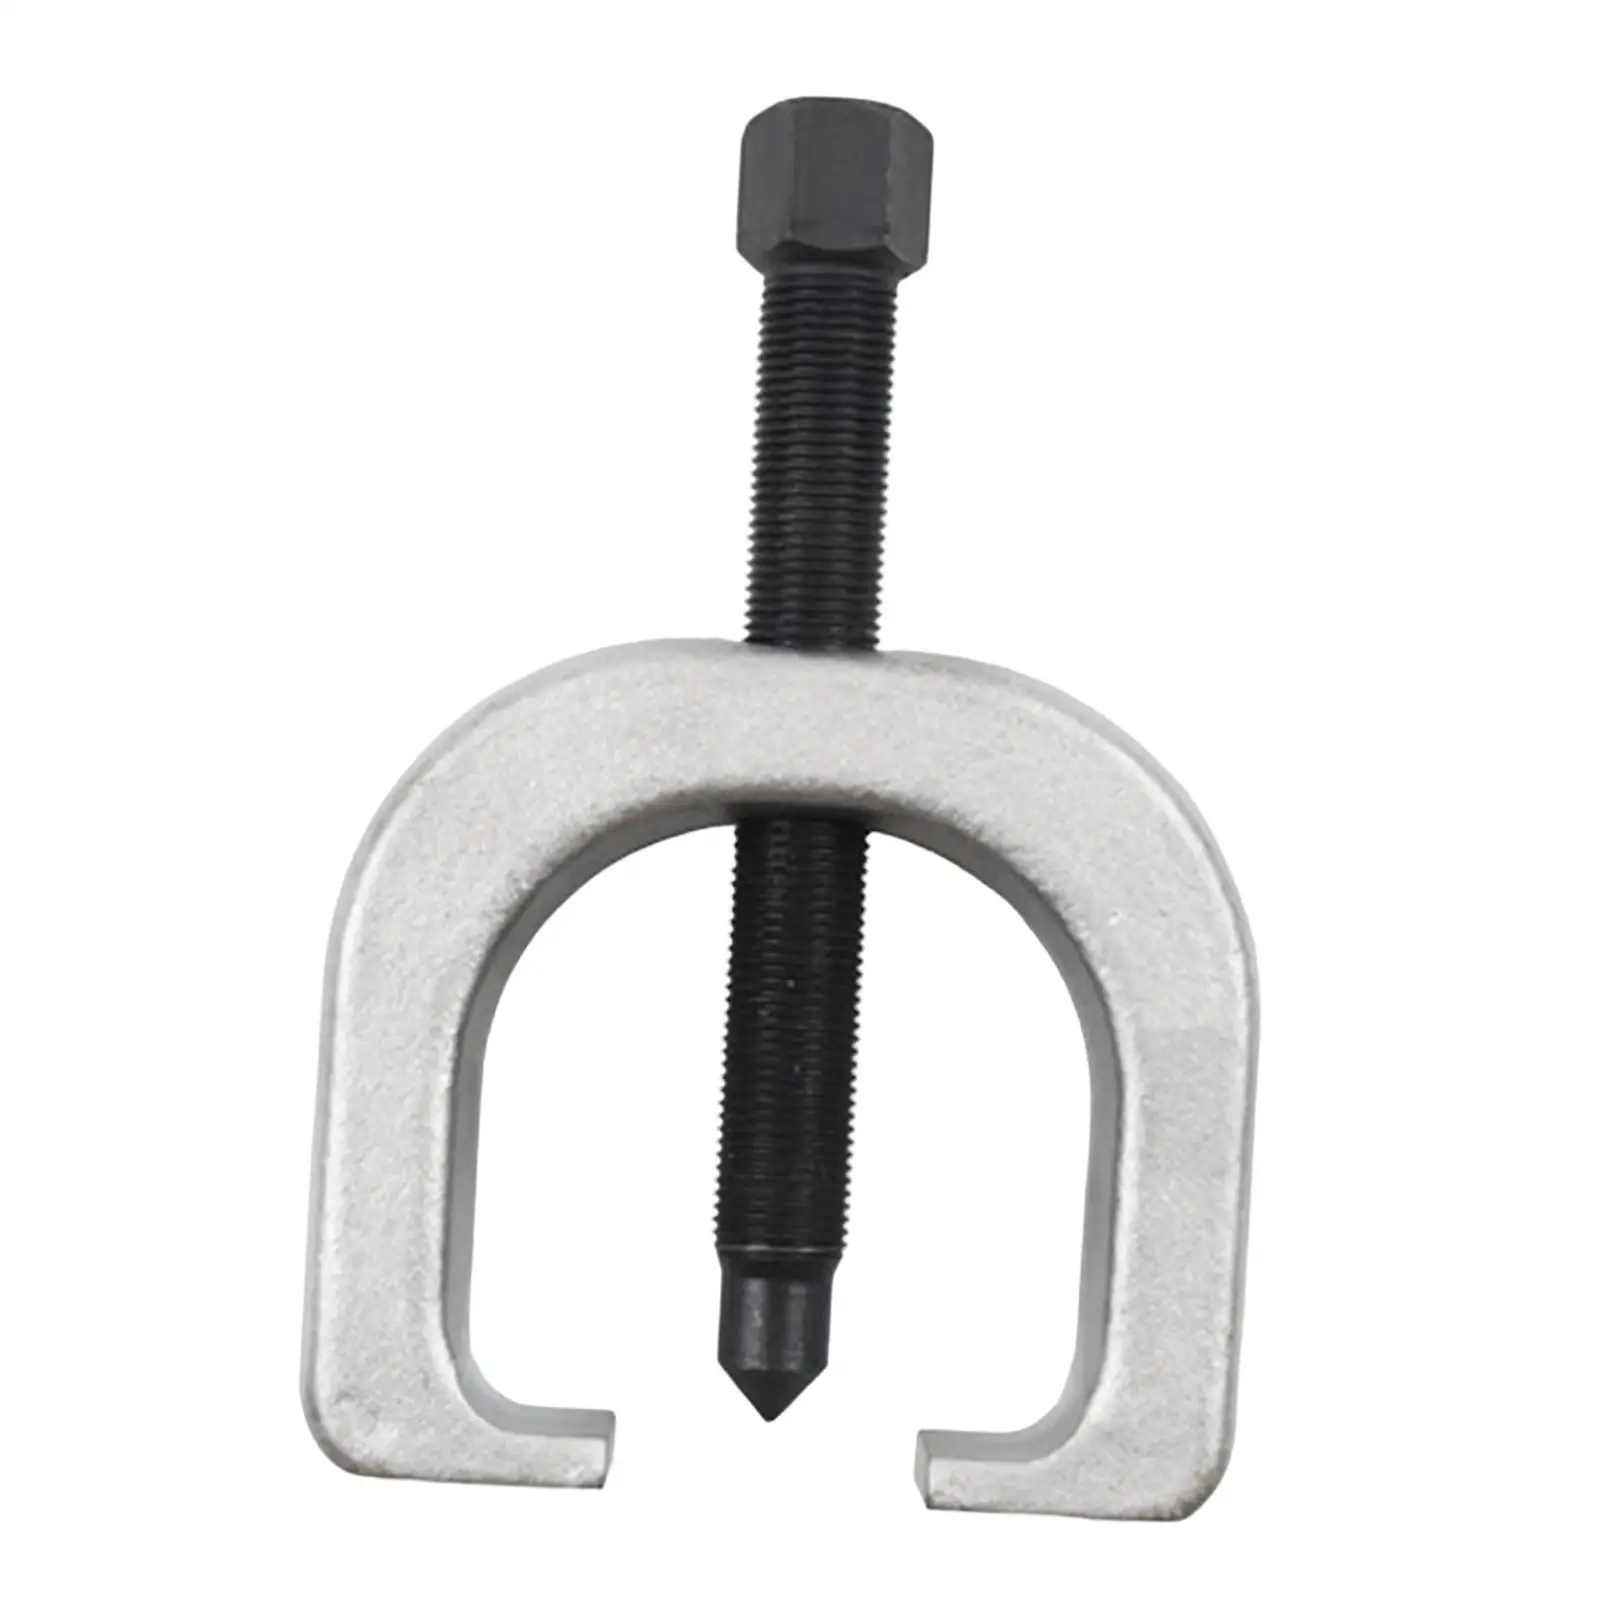 Slack Adjuster Puller High Performance Carbon Steel Sturdy Heavy Duty Professional Maintenance Tool for Trailers Trucks